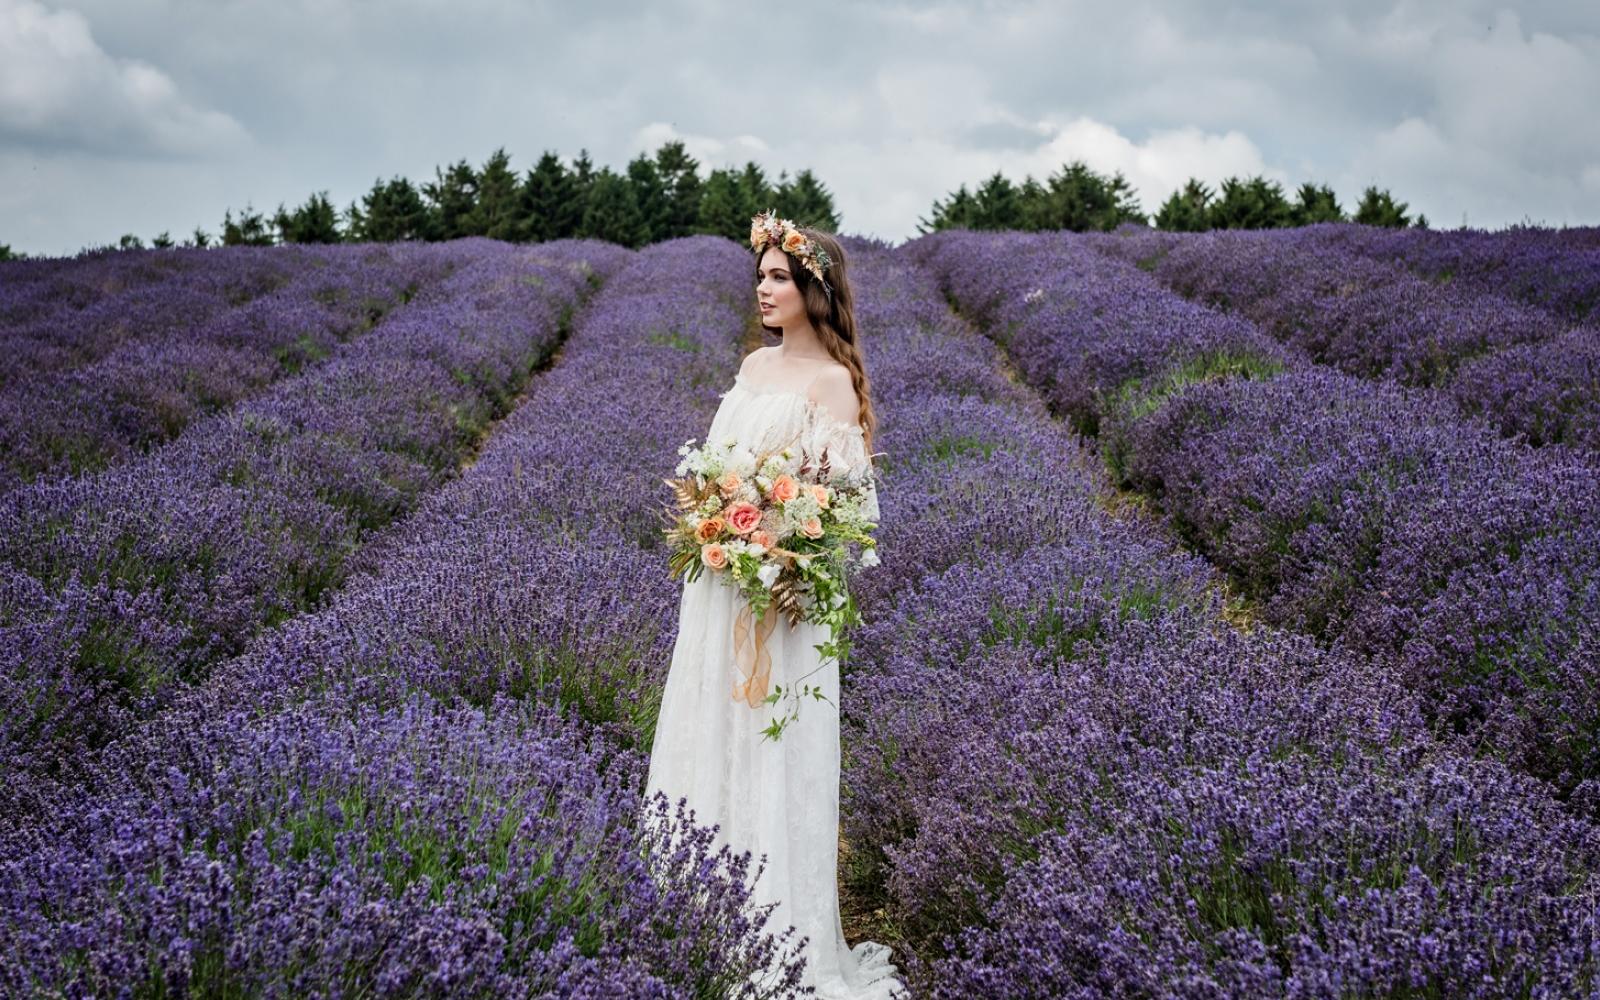 Styled Shoot ideas inspiration Capture Every Moment Make Up by Carissa Wendy House Flowers Willoughby Wolf lavender fields Snowshill boho style